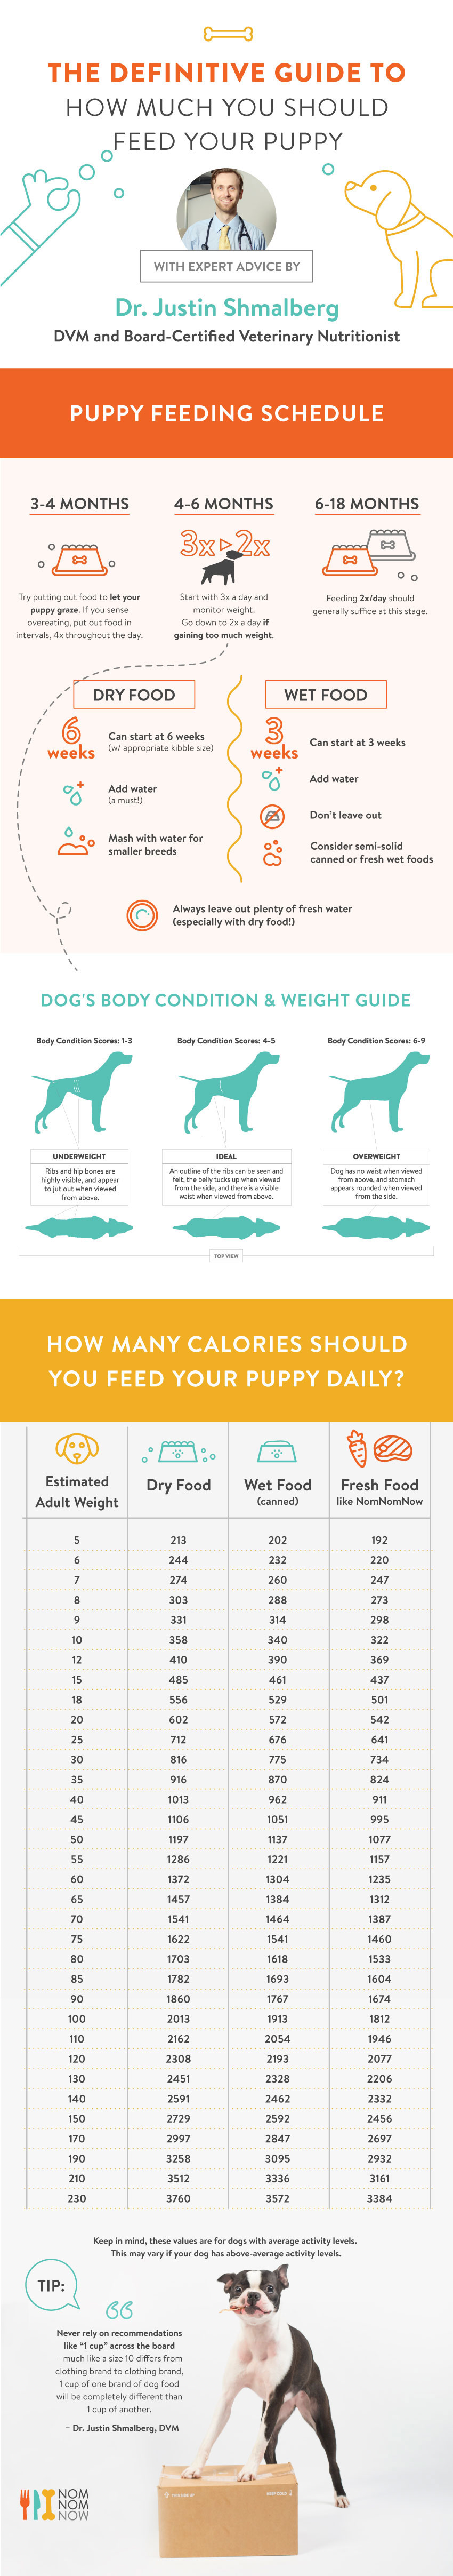 puppy feeding guide infographic